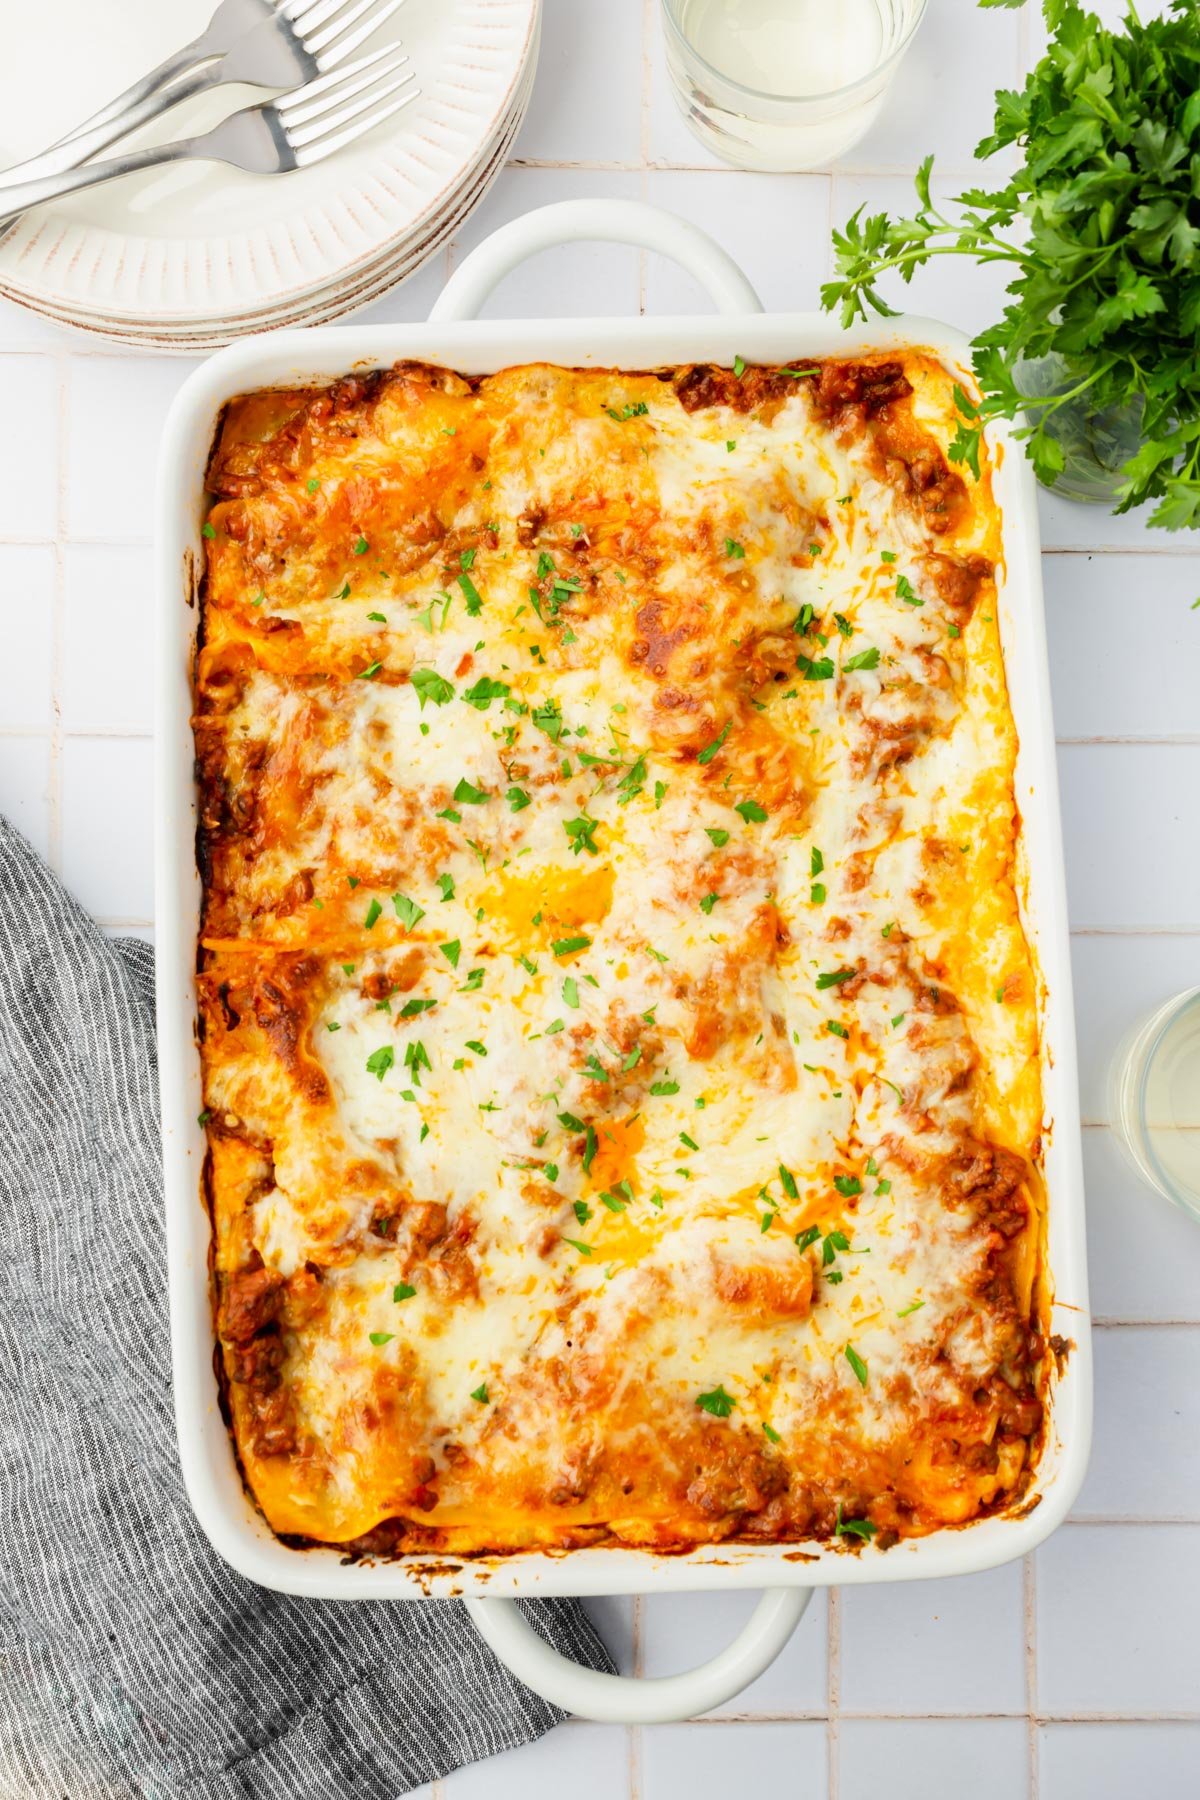 A 13x19 pan of gluten-free beef lasagna topped with fresh parsley.